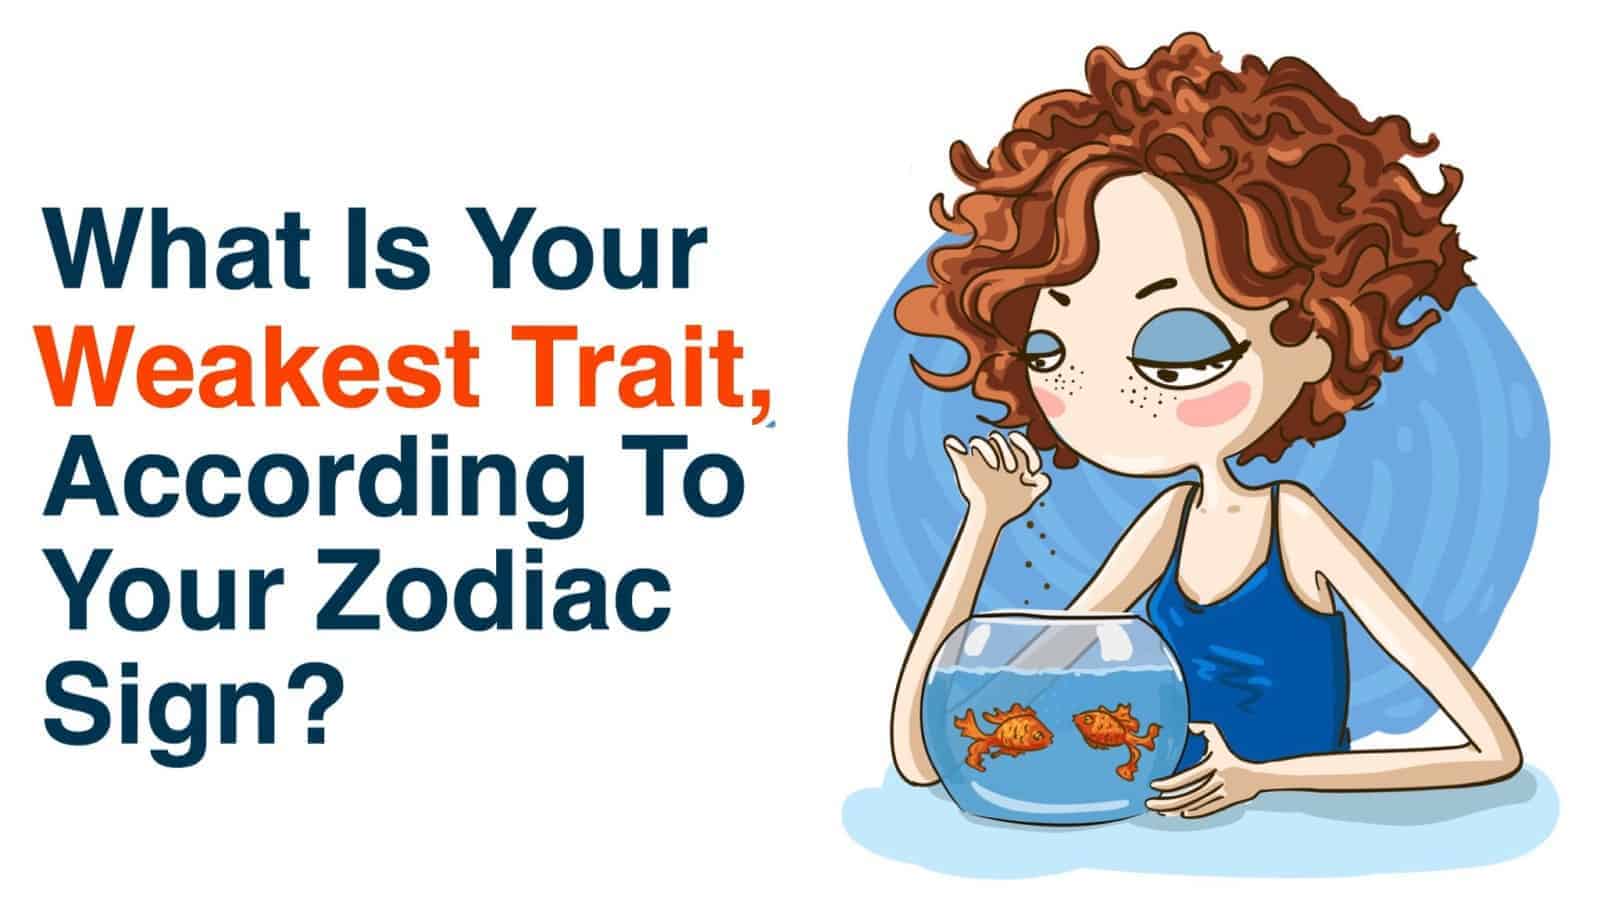 What Is Your Weakest Trait, According To Your Zodiac Sign?